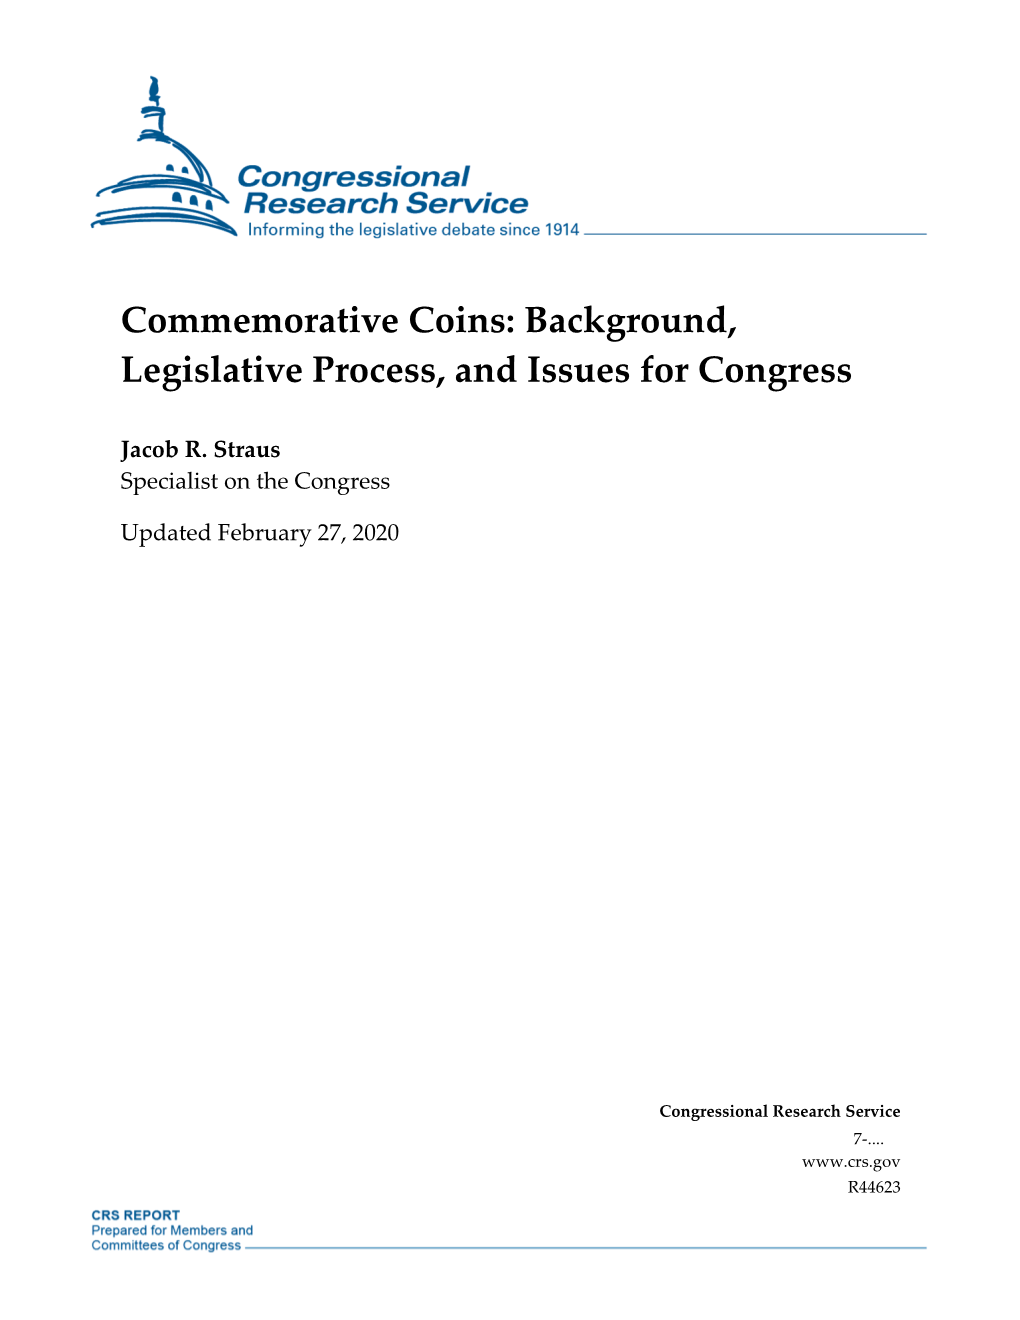 Commemorative Coins: Background, Legislative Process, and Issues for Congress